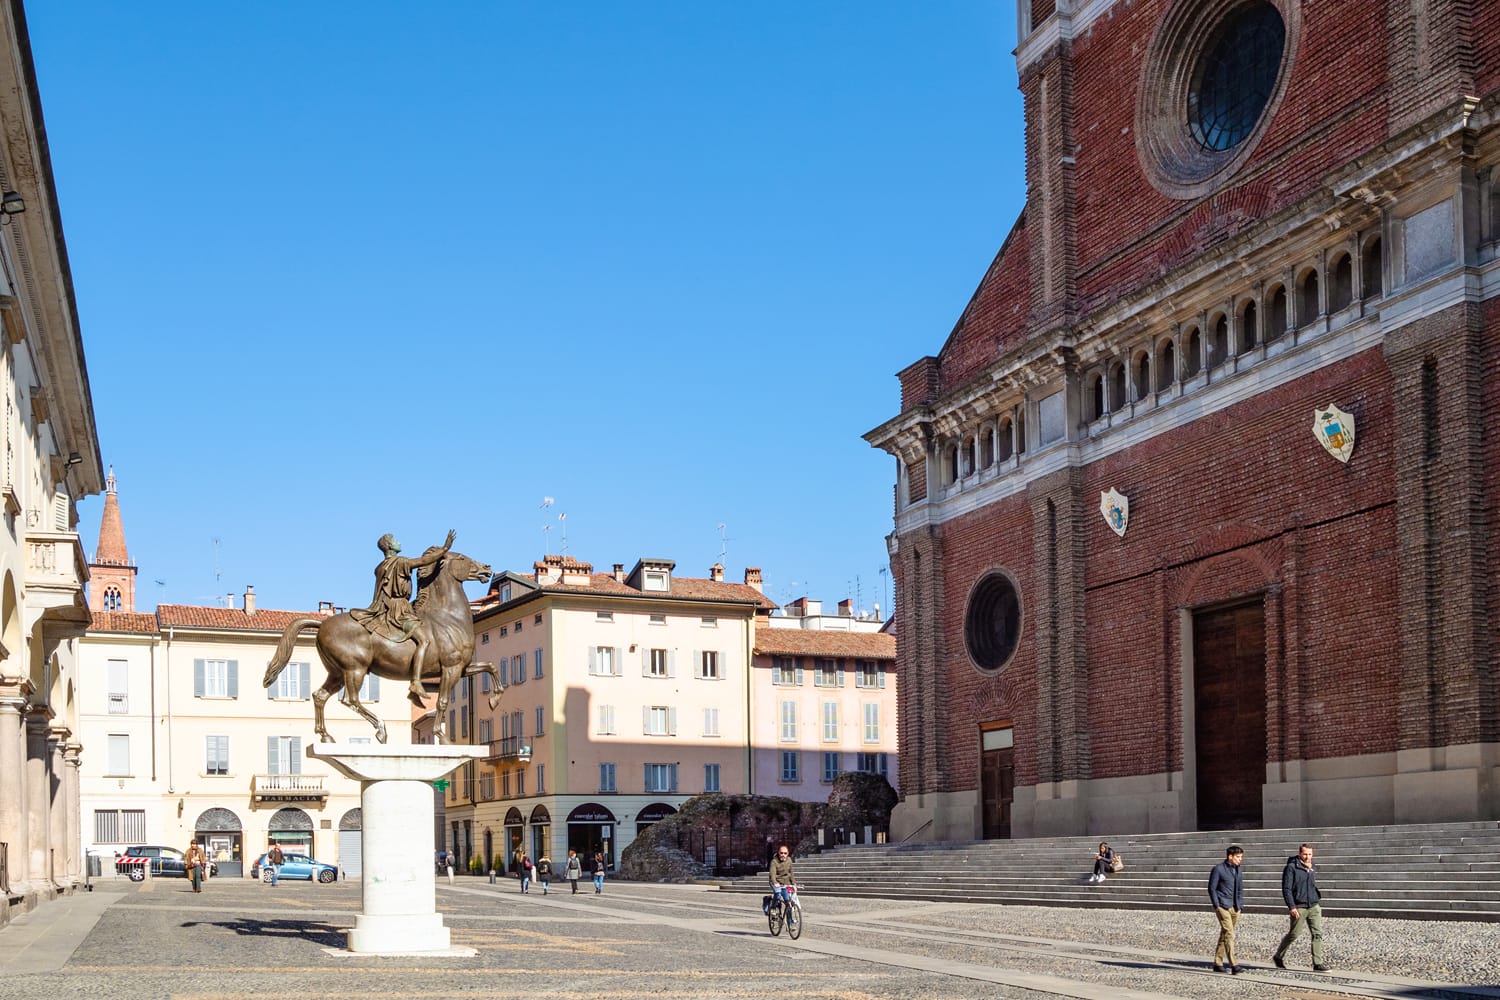 People walk near monument Regisole and Cathedral on Piazza del Duomo in Pavia, Italy